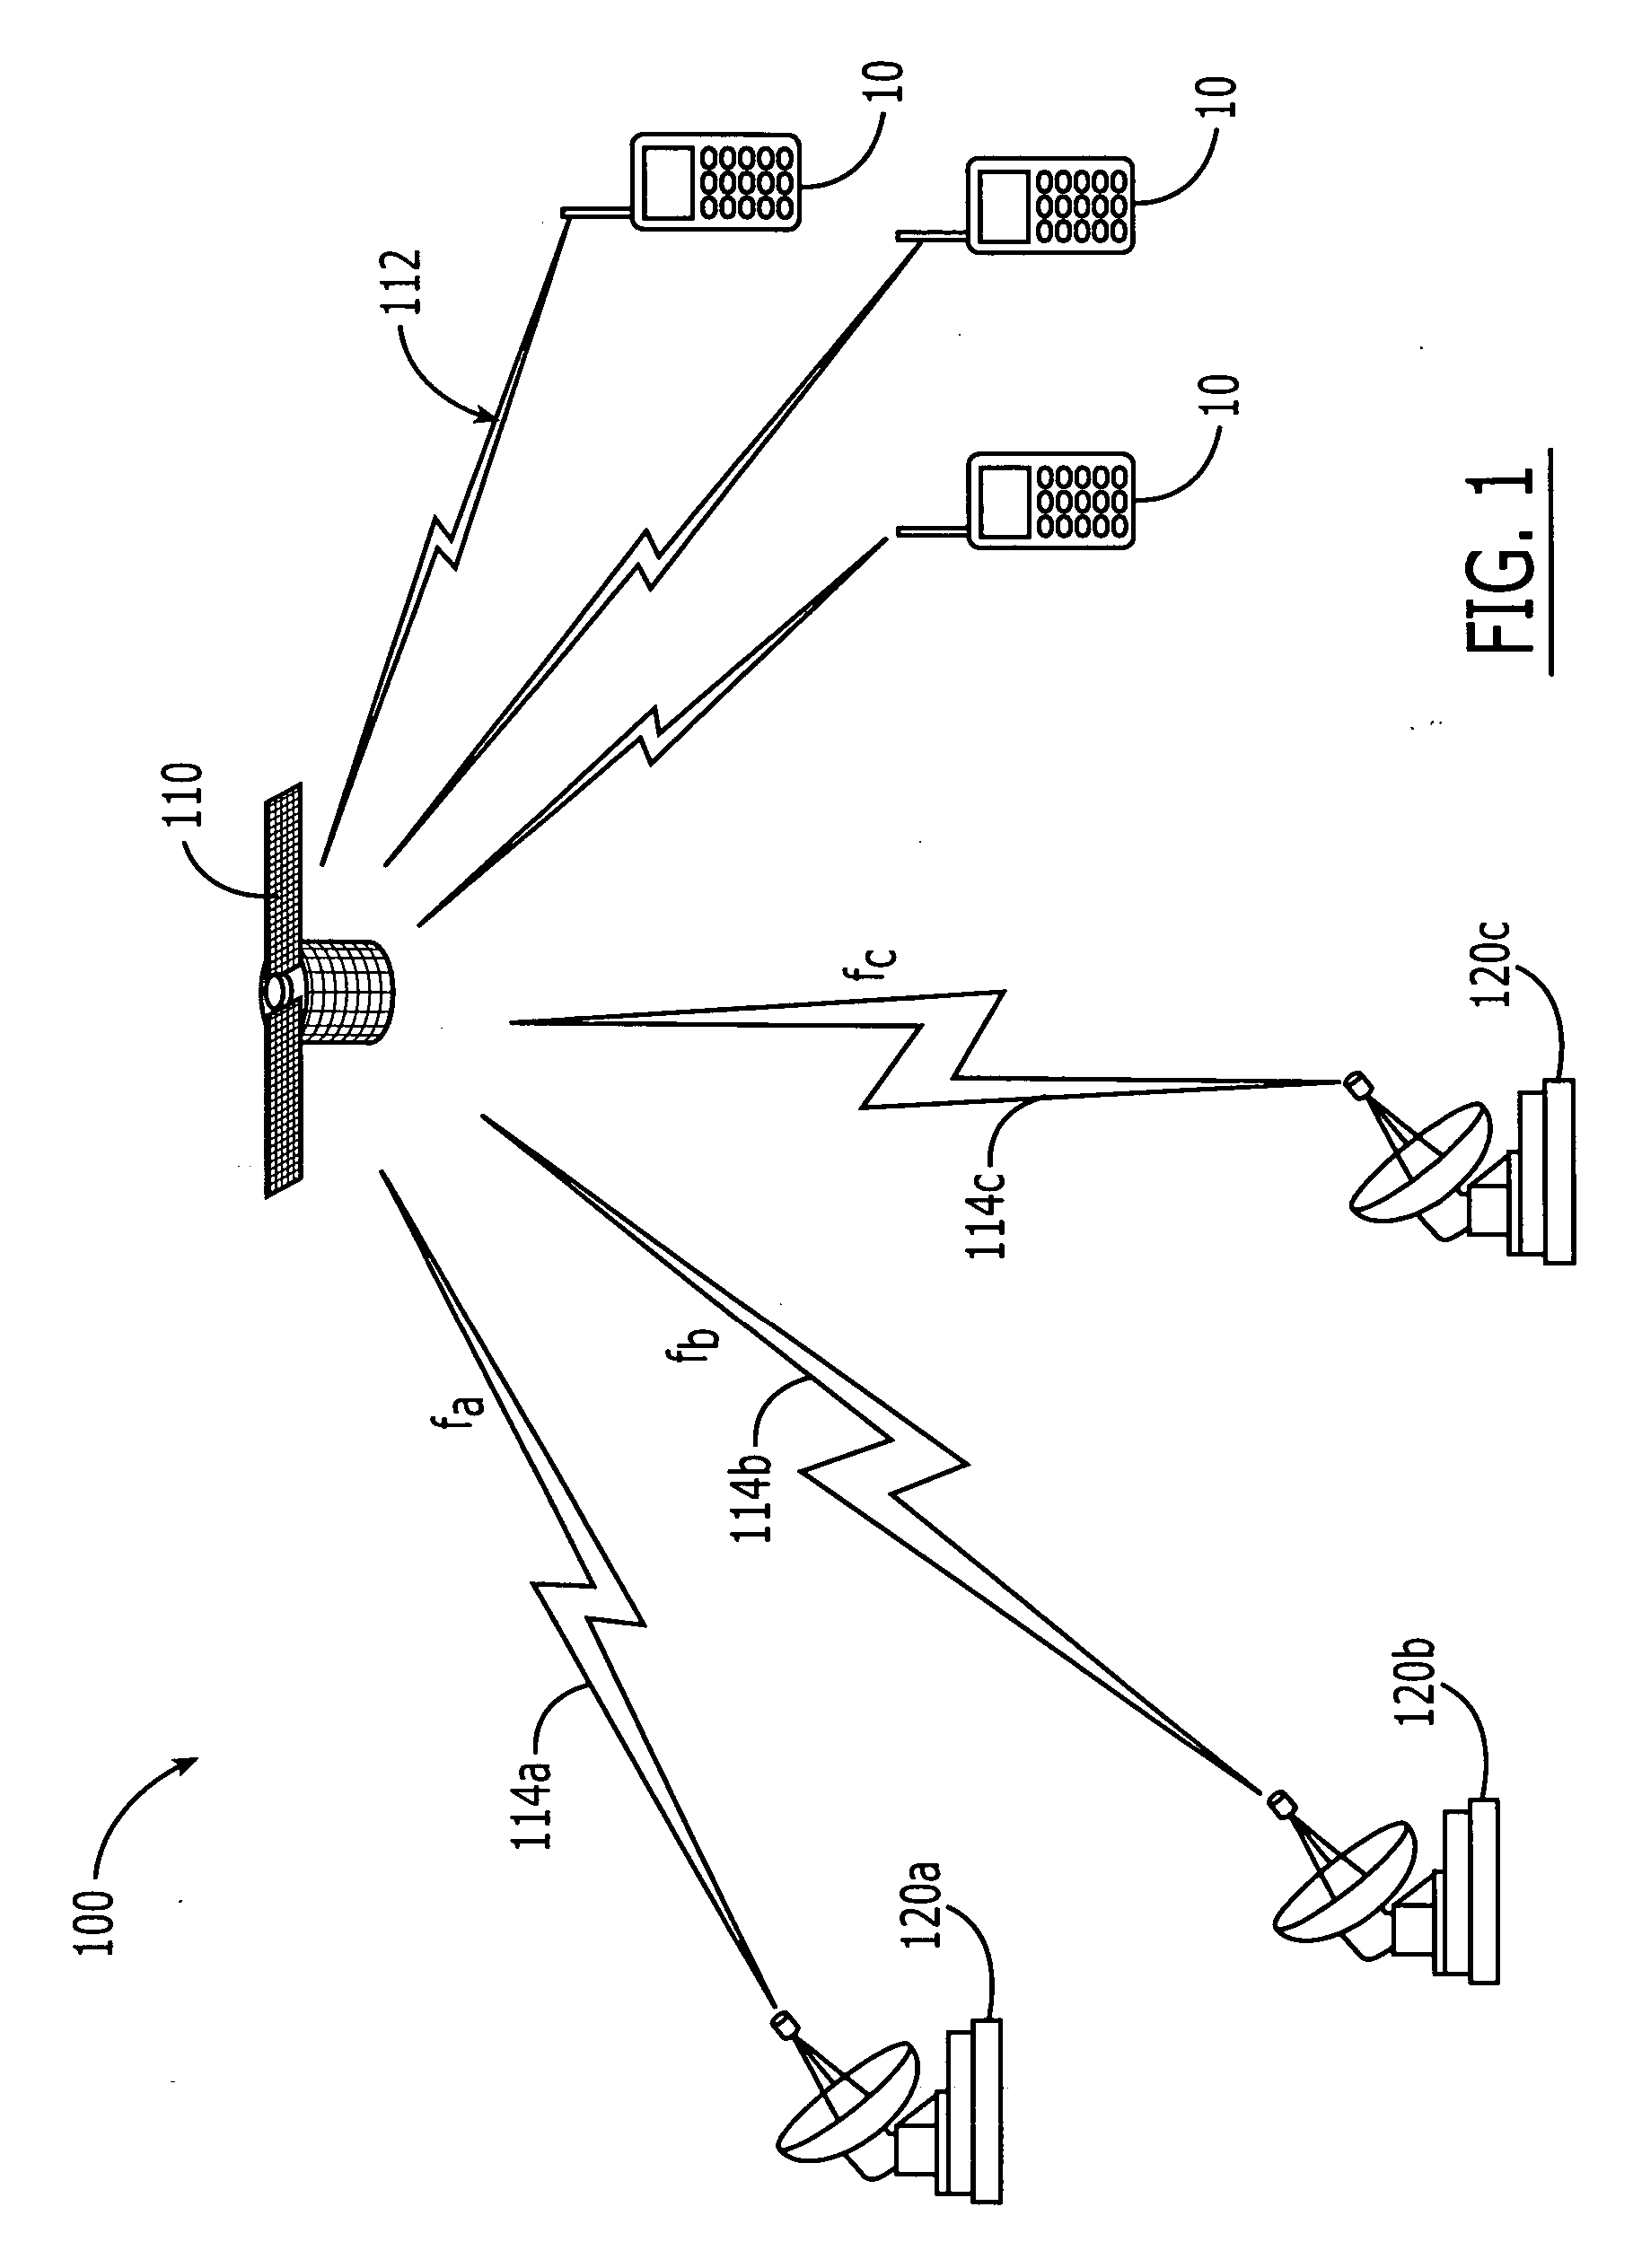 Satellite communications systems and methods with distributed and/or centralized architecture including ground-based beam forming